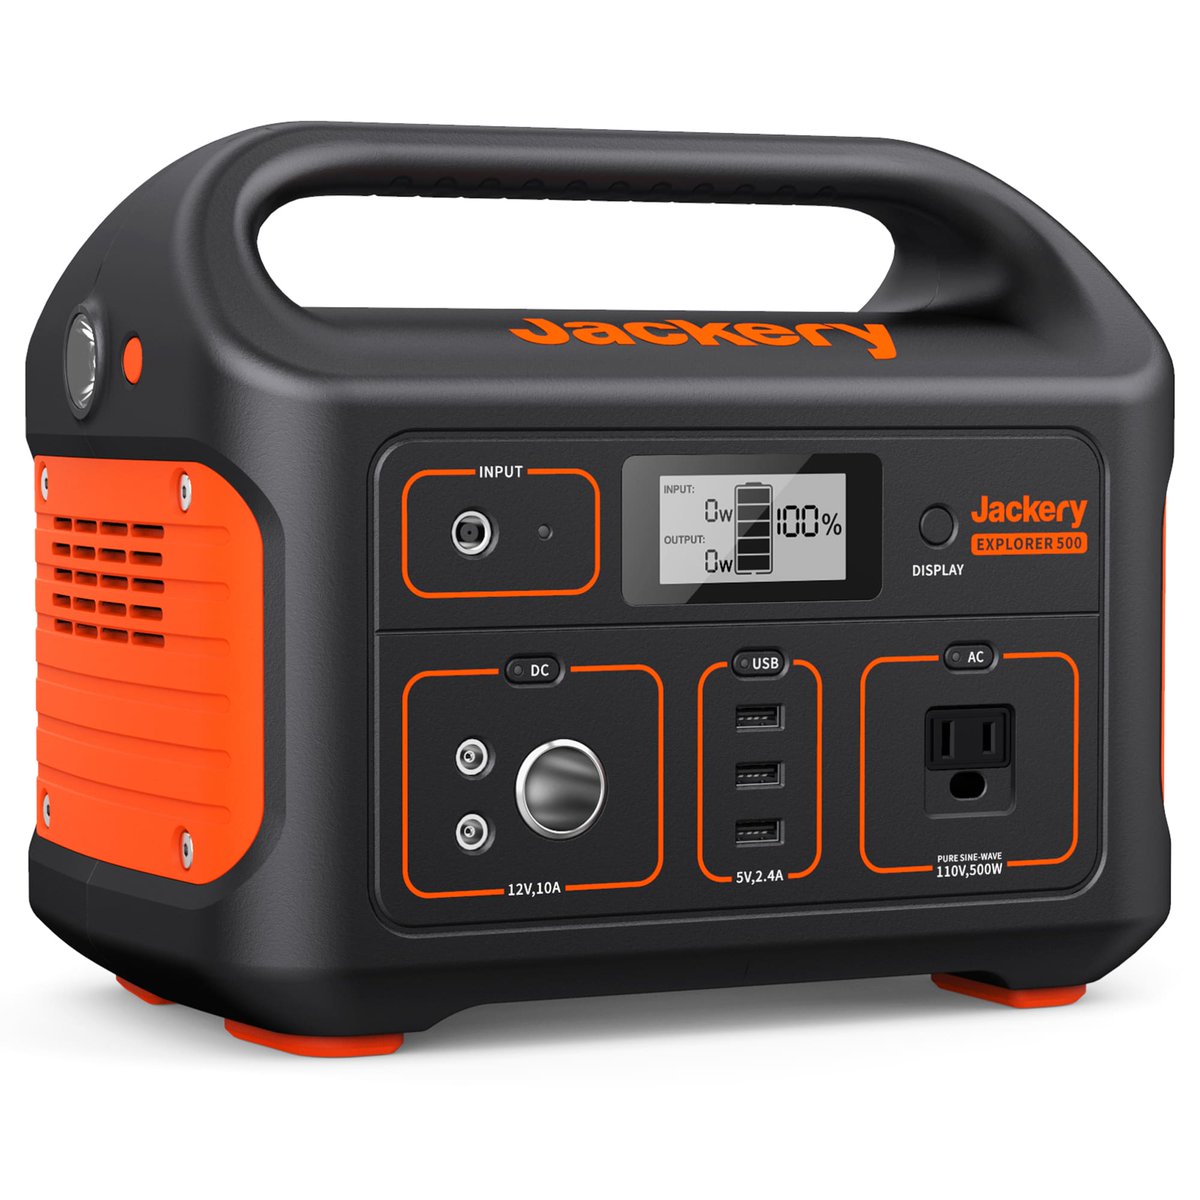 Looking for an easy and reliable way to power your devices on-the-go? Check out Jackery's portable power station! With its compact size and multiple output options, it's perfect for camping trips, road trips, and more. #PortablePower #AffiliateLink jackery.sjv.io/0ZG0kL